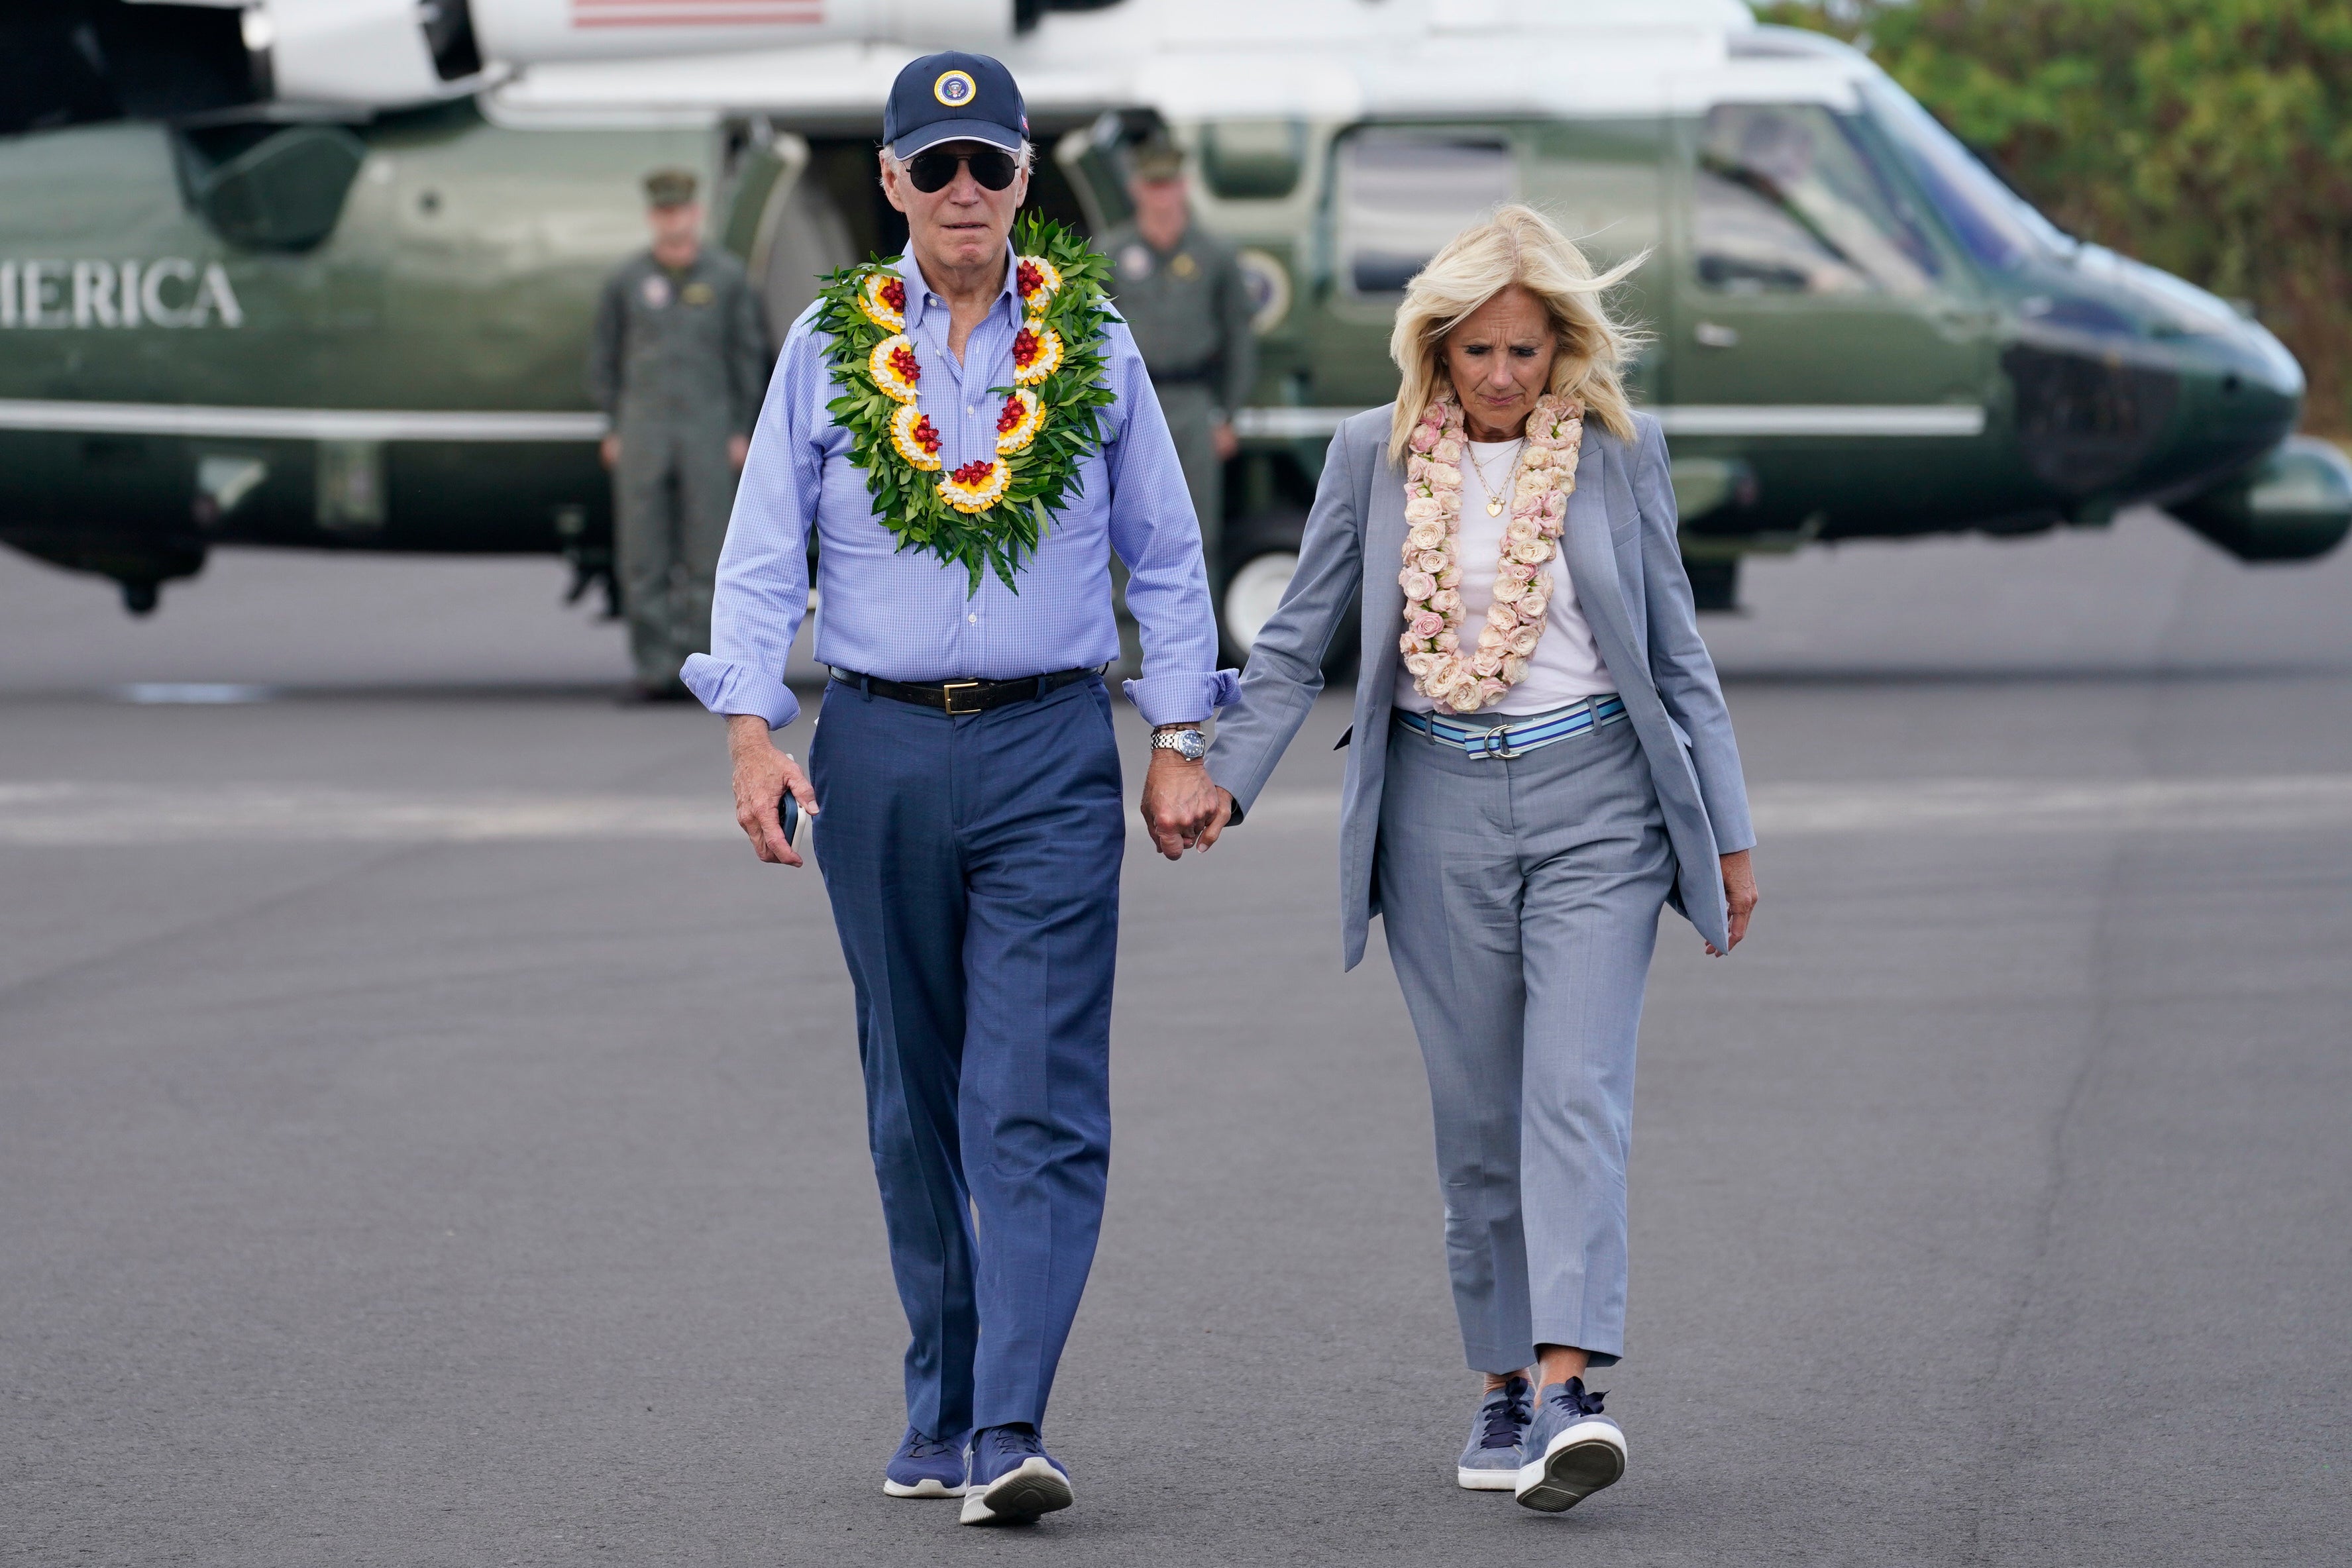 President Joe Biden and first lady Jill Biden walk to board Air Force One after visiting the site of the devastating Maui wildfires